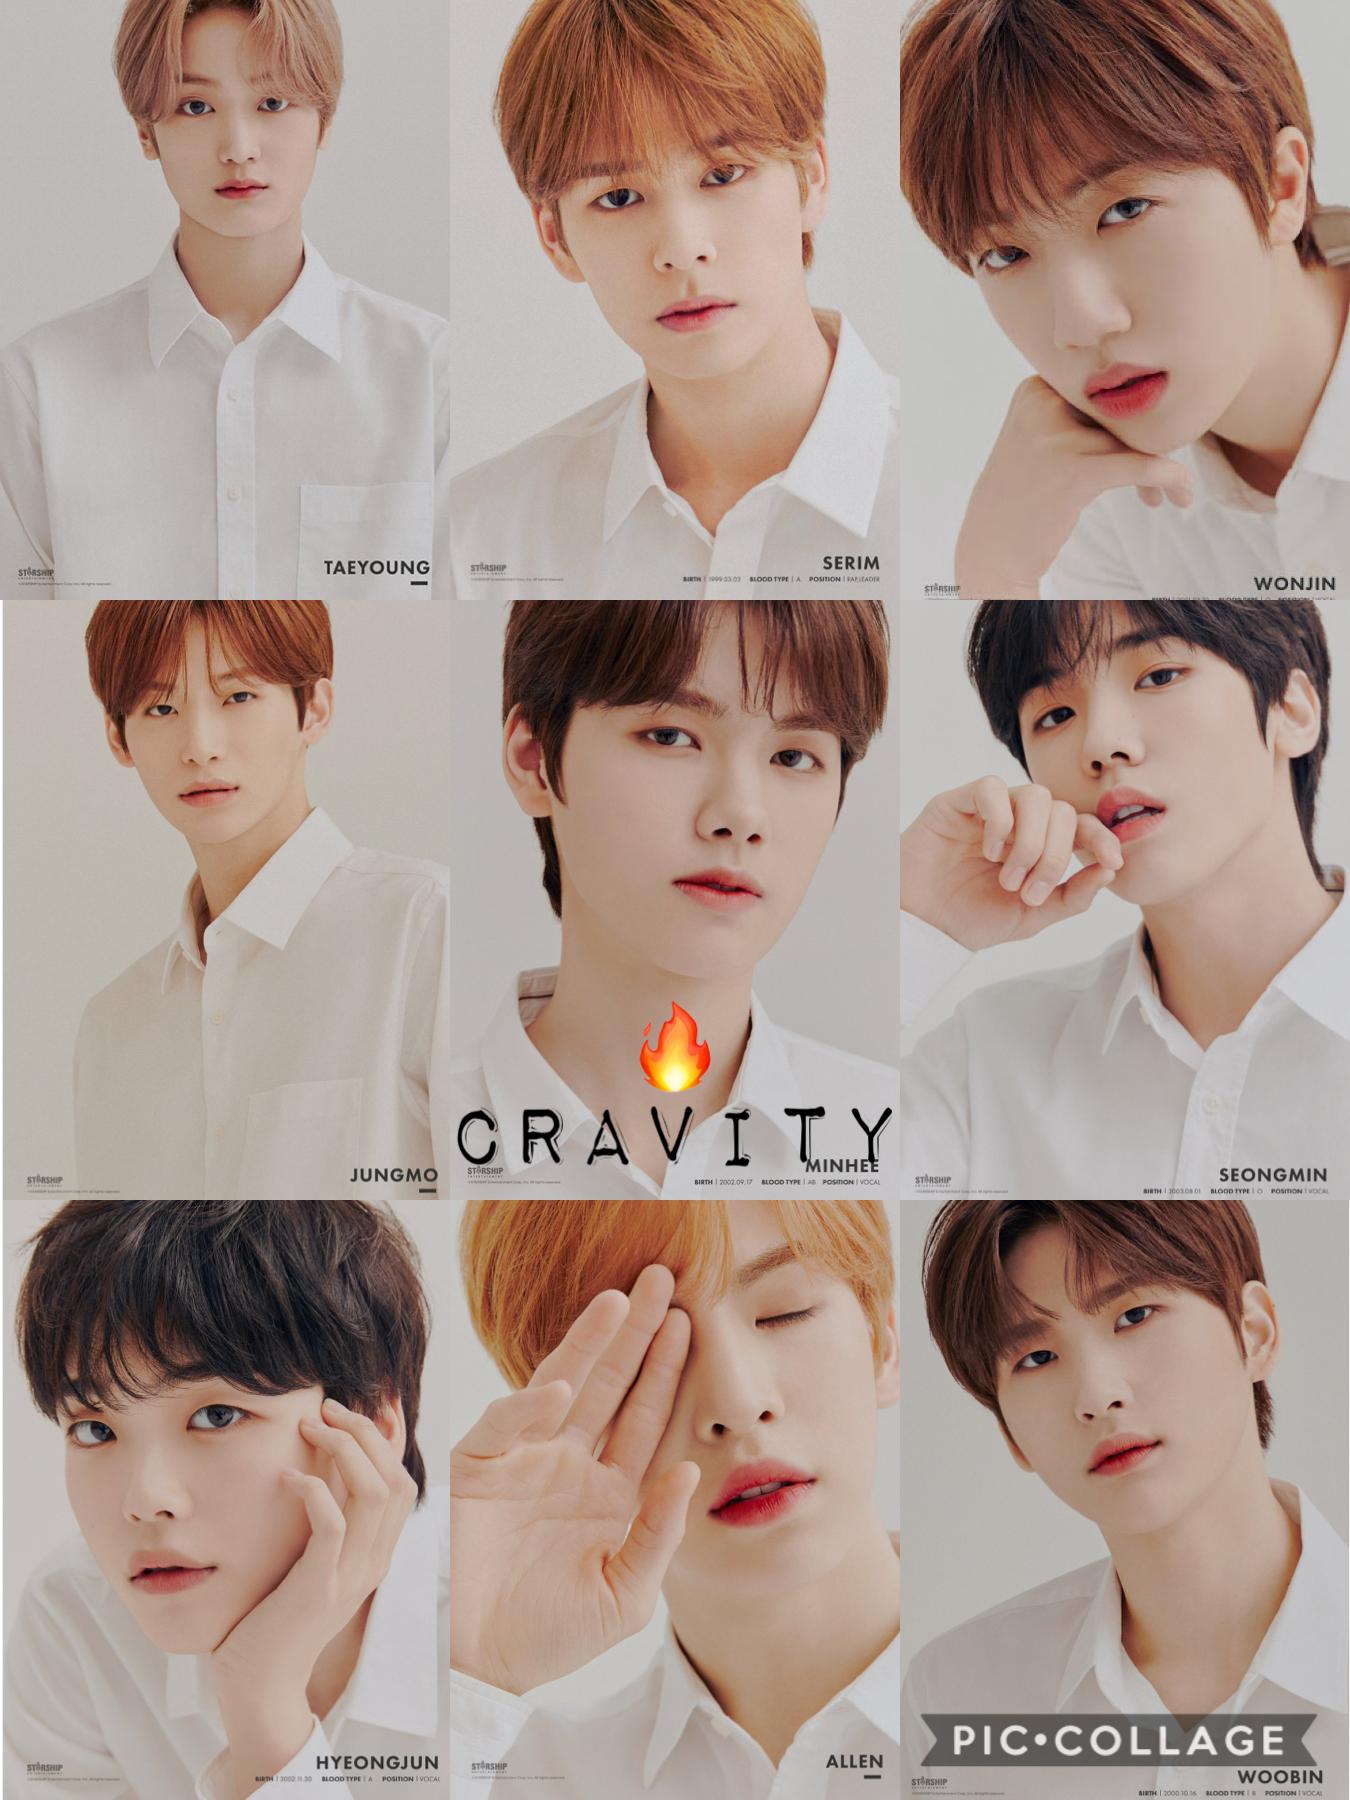 A new group that debuted 4 days ago 💓 imma start stanning 😚 check out their first album “CRAVITY HIDEOUT: REMEMBER WHO WE ARE” 😊